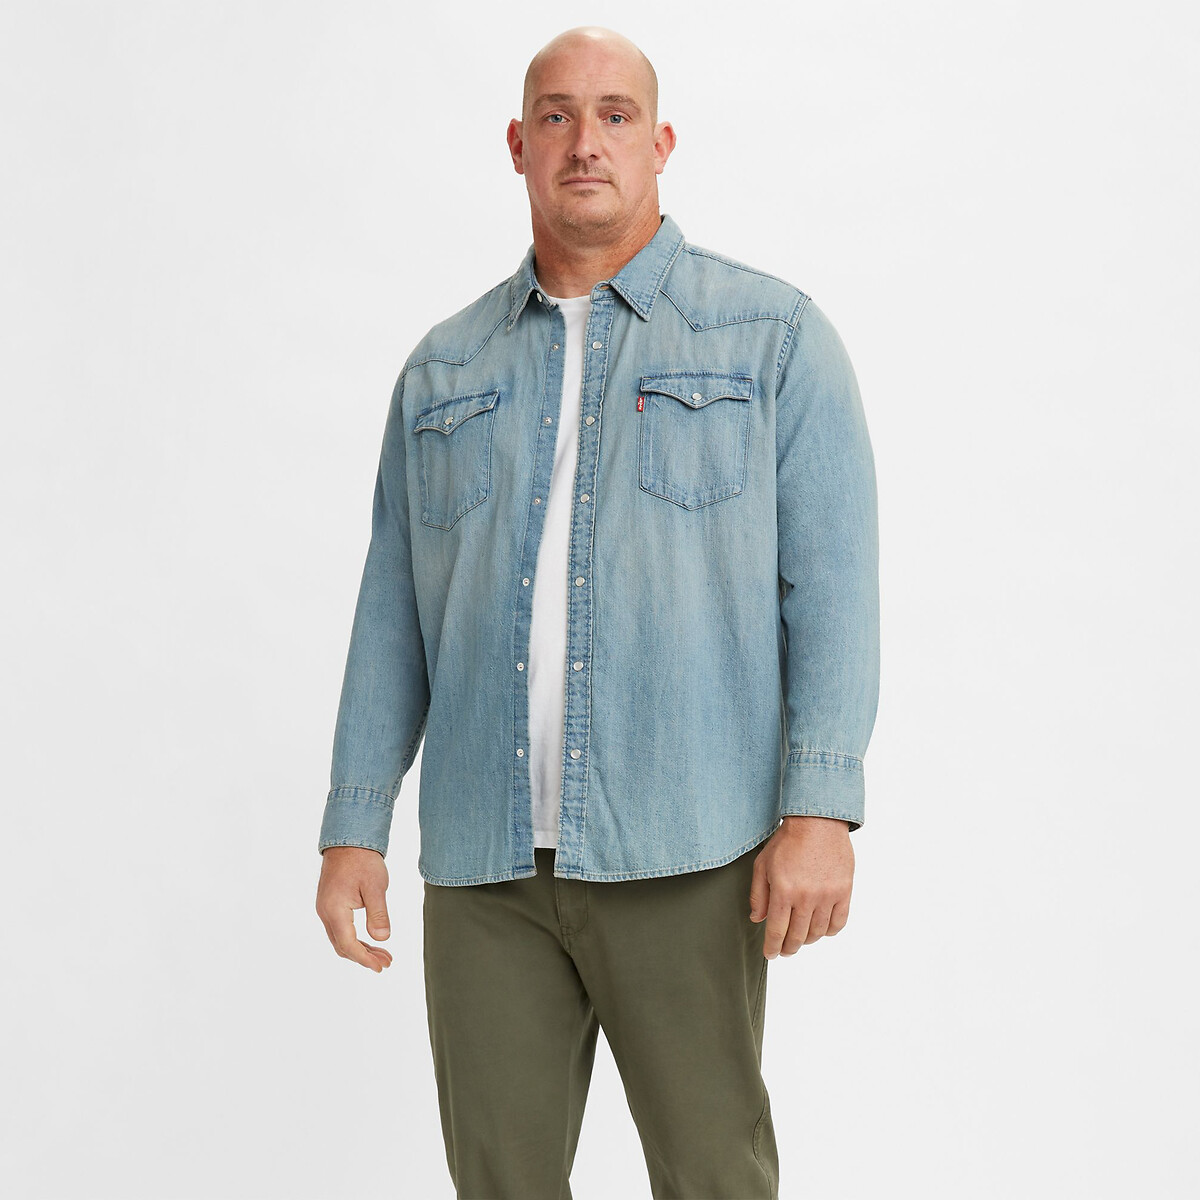 barstow big & tall shirt in denim and regular fit